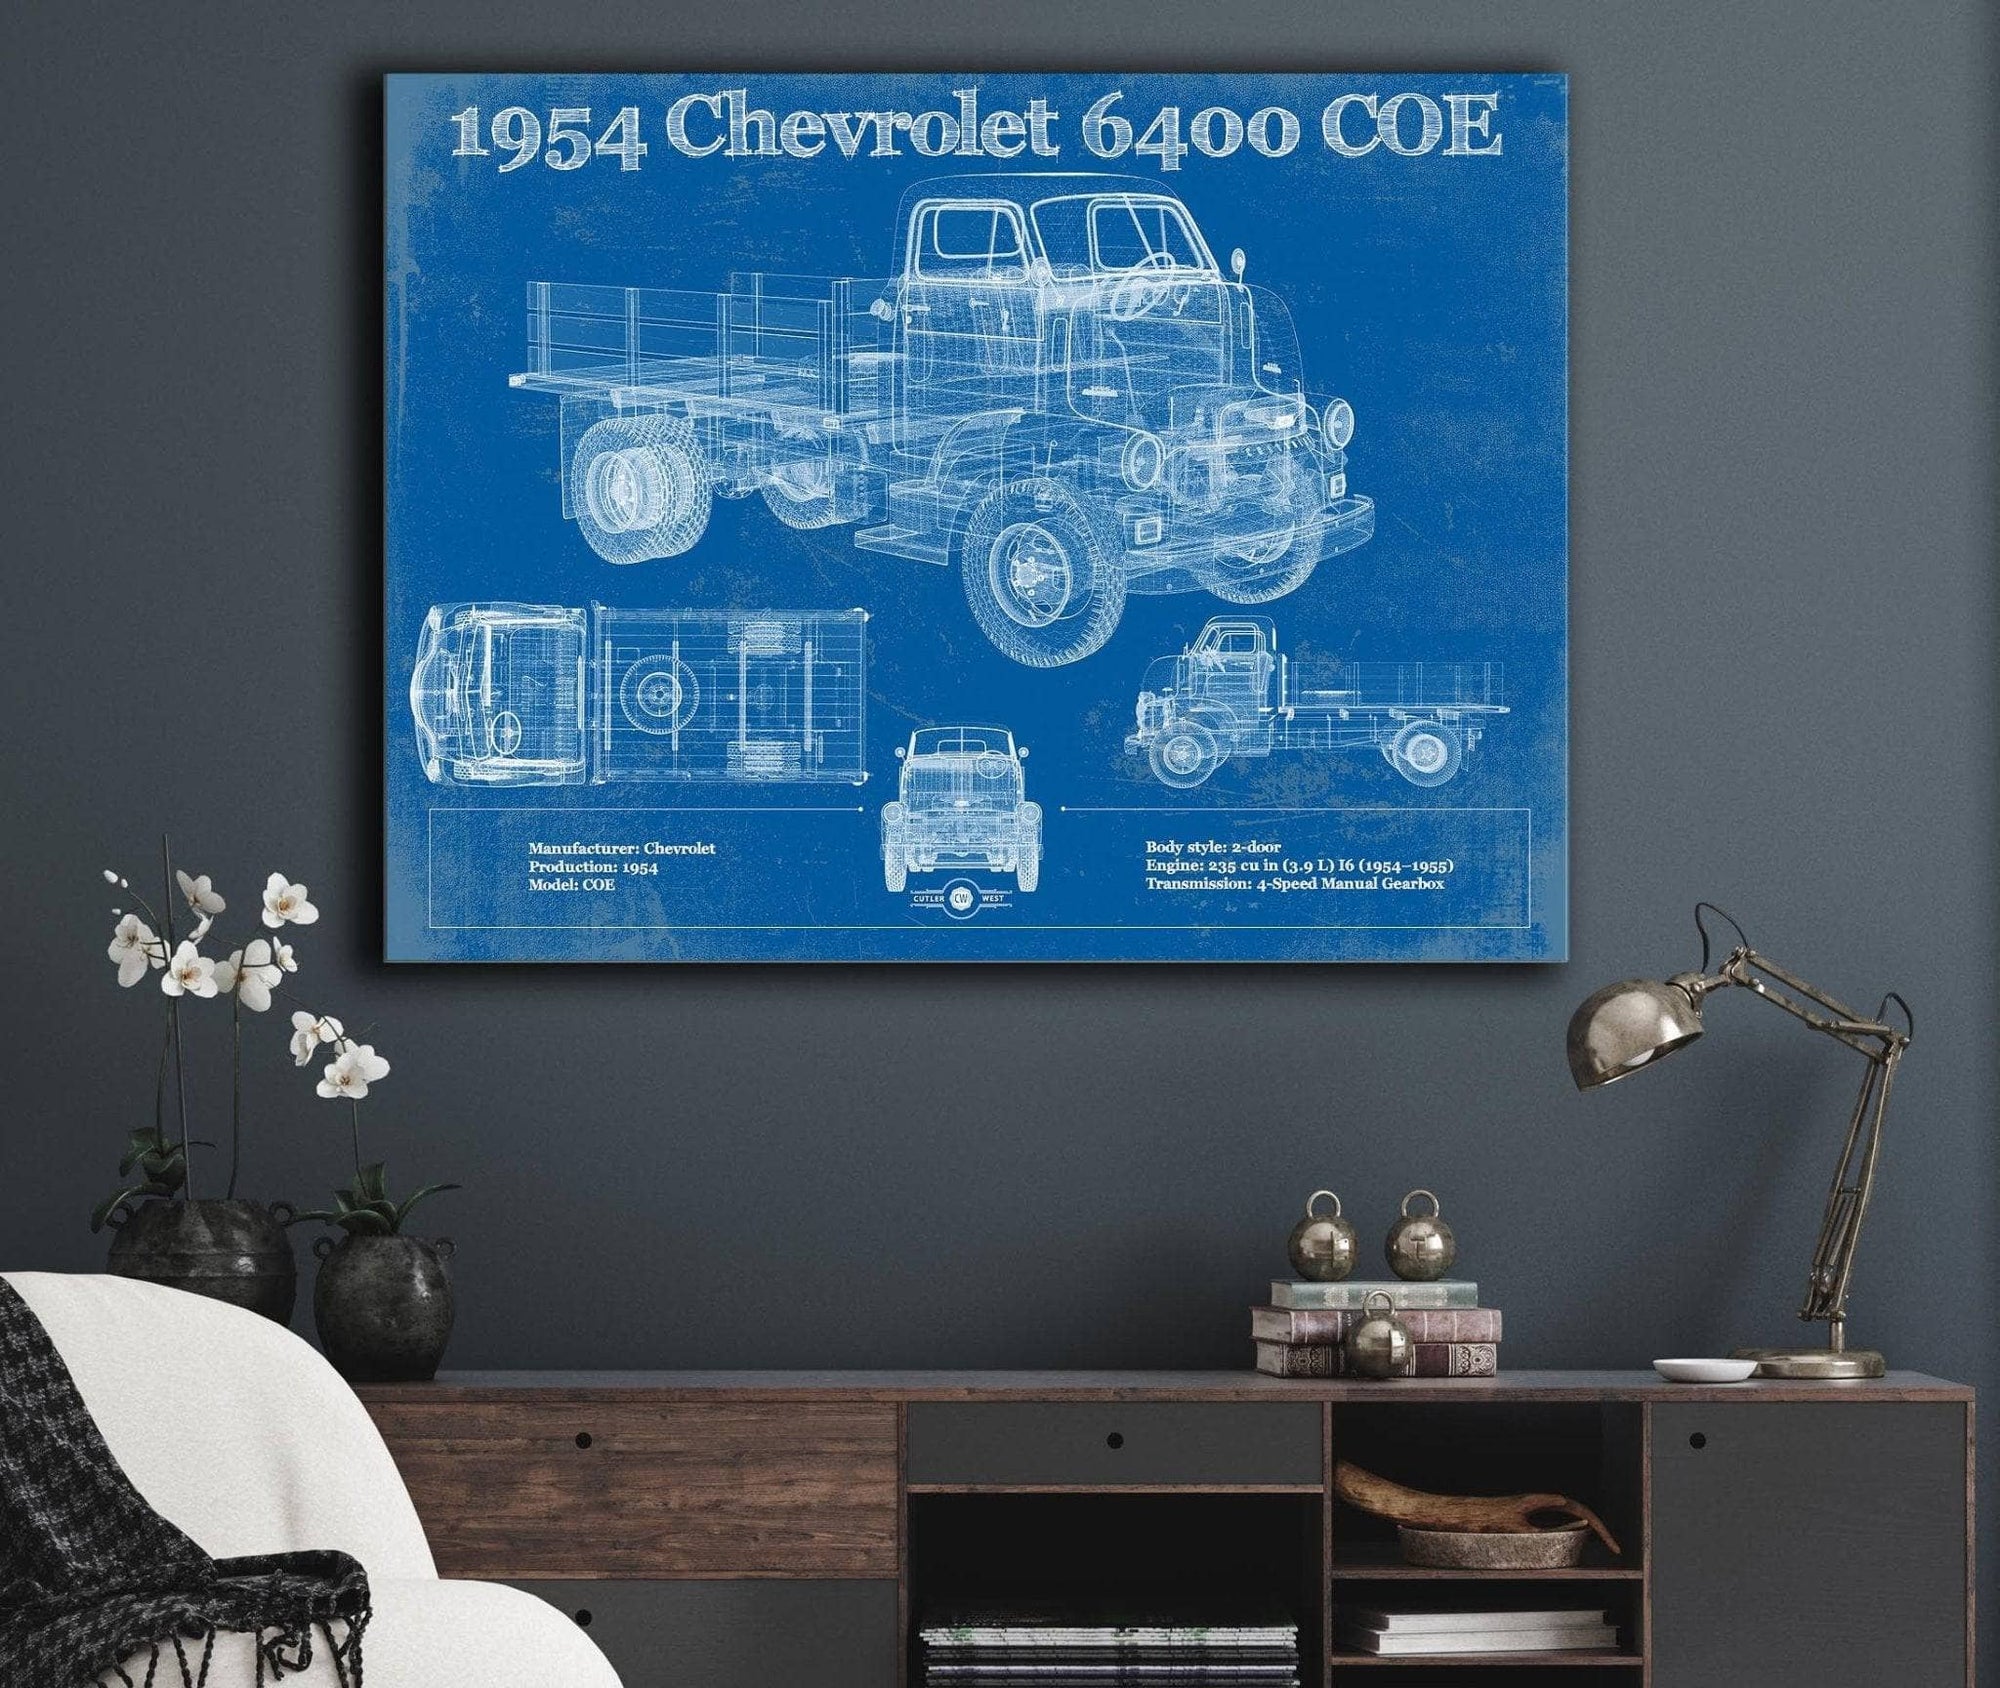 Cutler West Chevrolet Collection Chevy 6400 COE 1954 Flat Bed Truck Vintage Blueprint Art